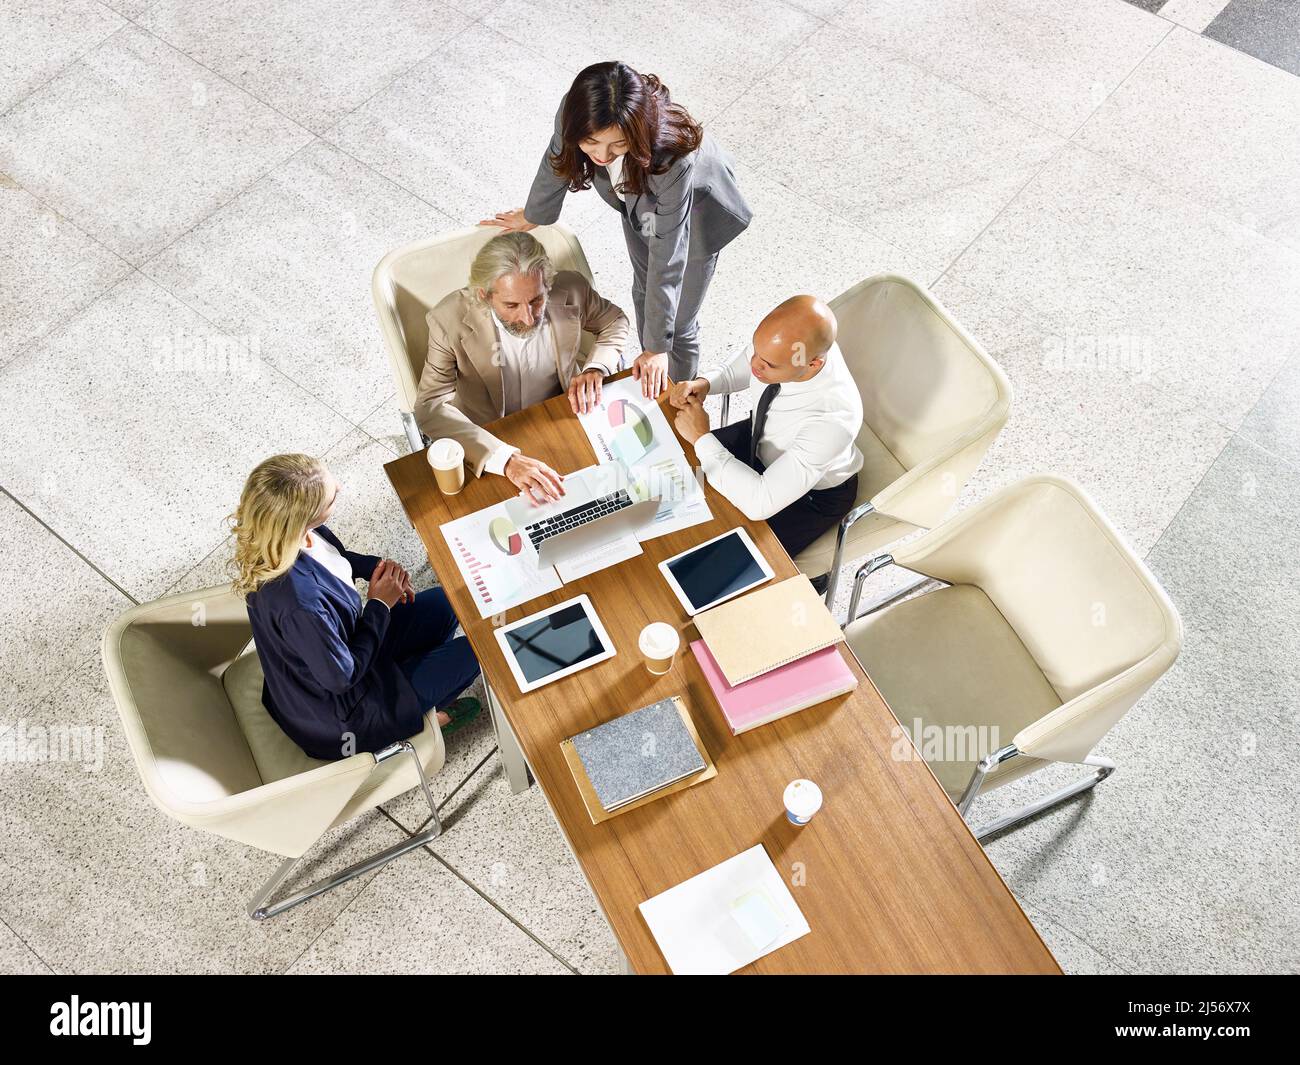 multiethnic group of corporate business people meeting in office Stock Photo